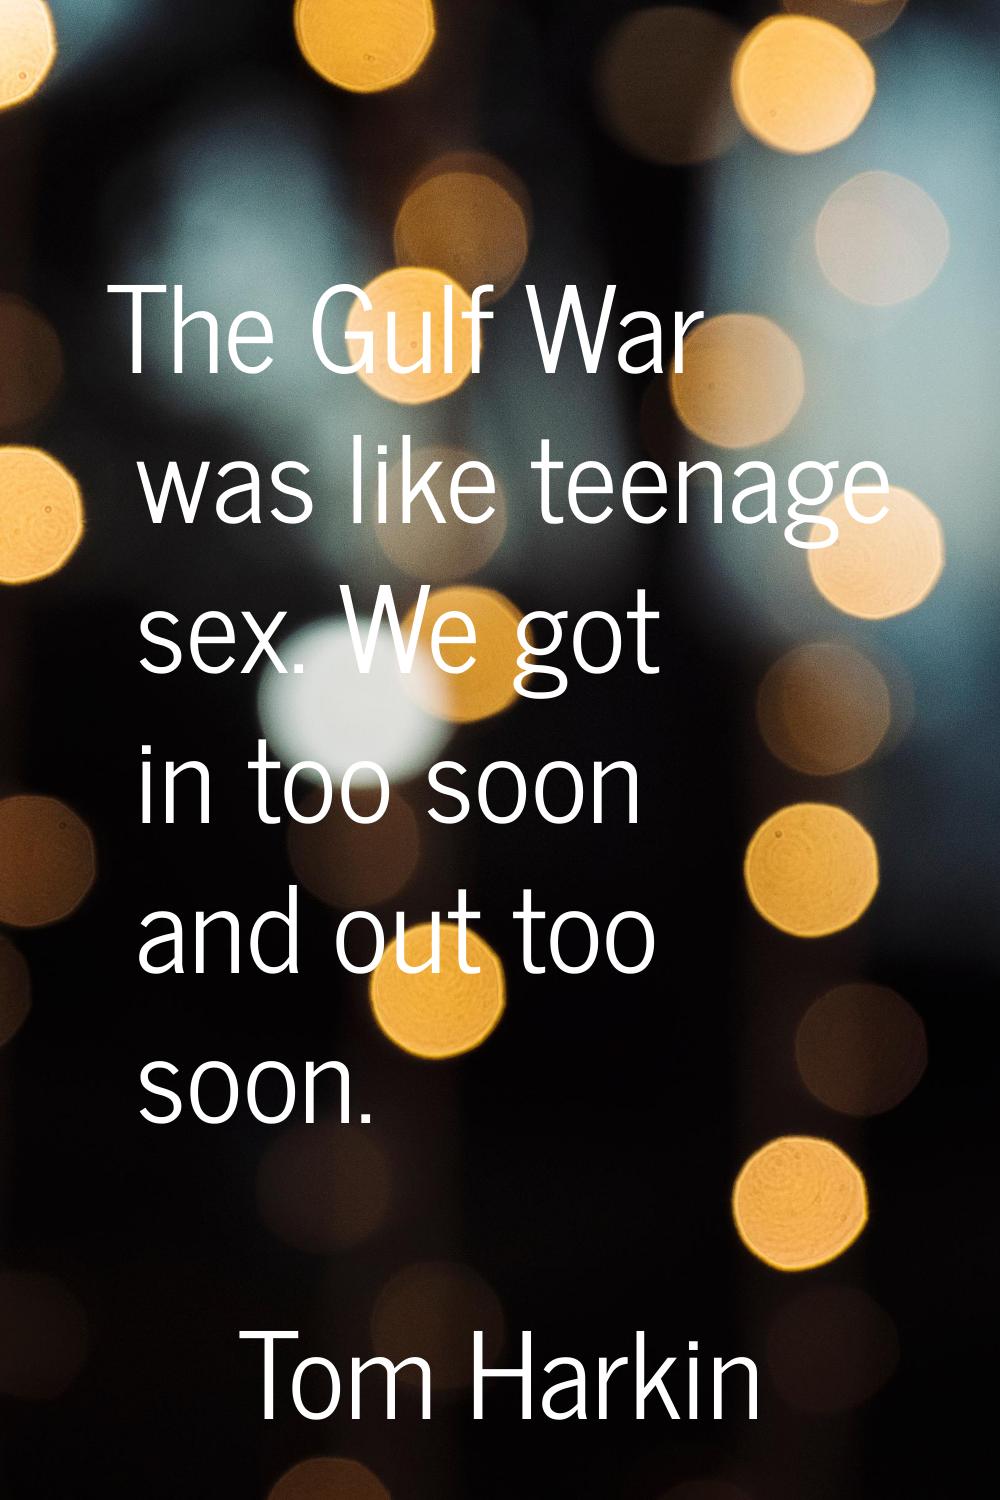 The Gulf War was like teenage sex. We got in too soon and out too soon.